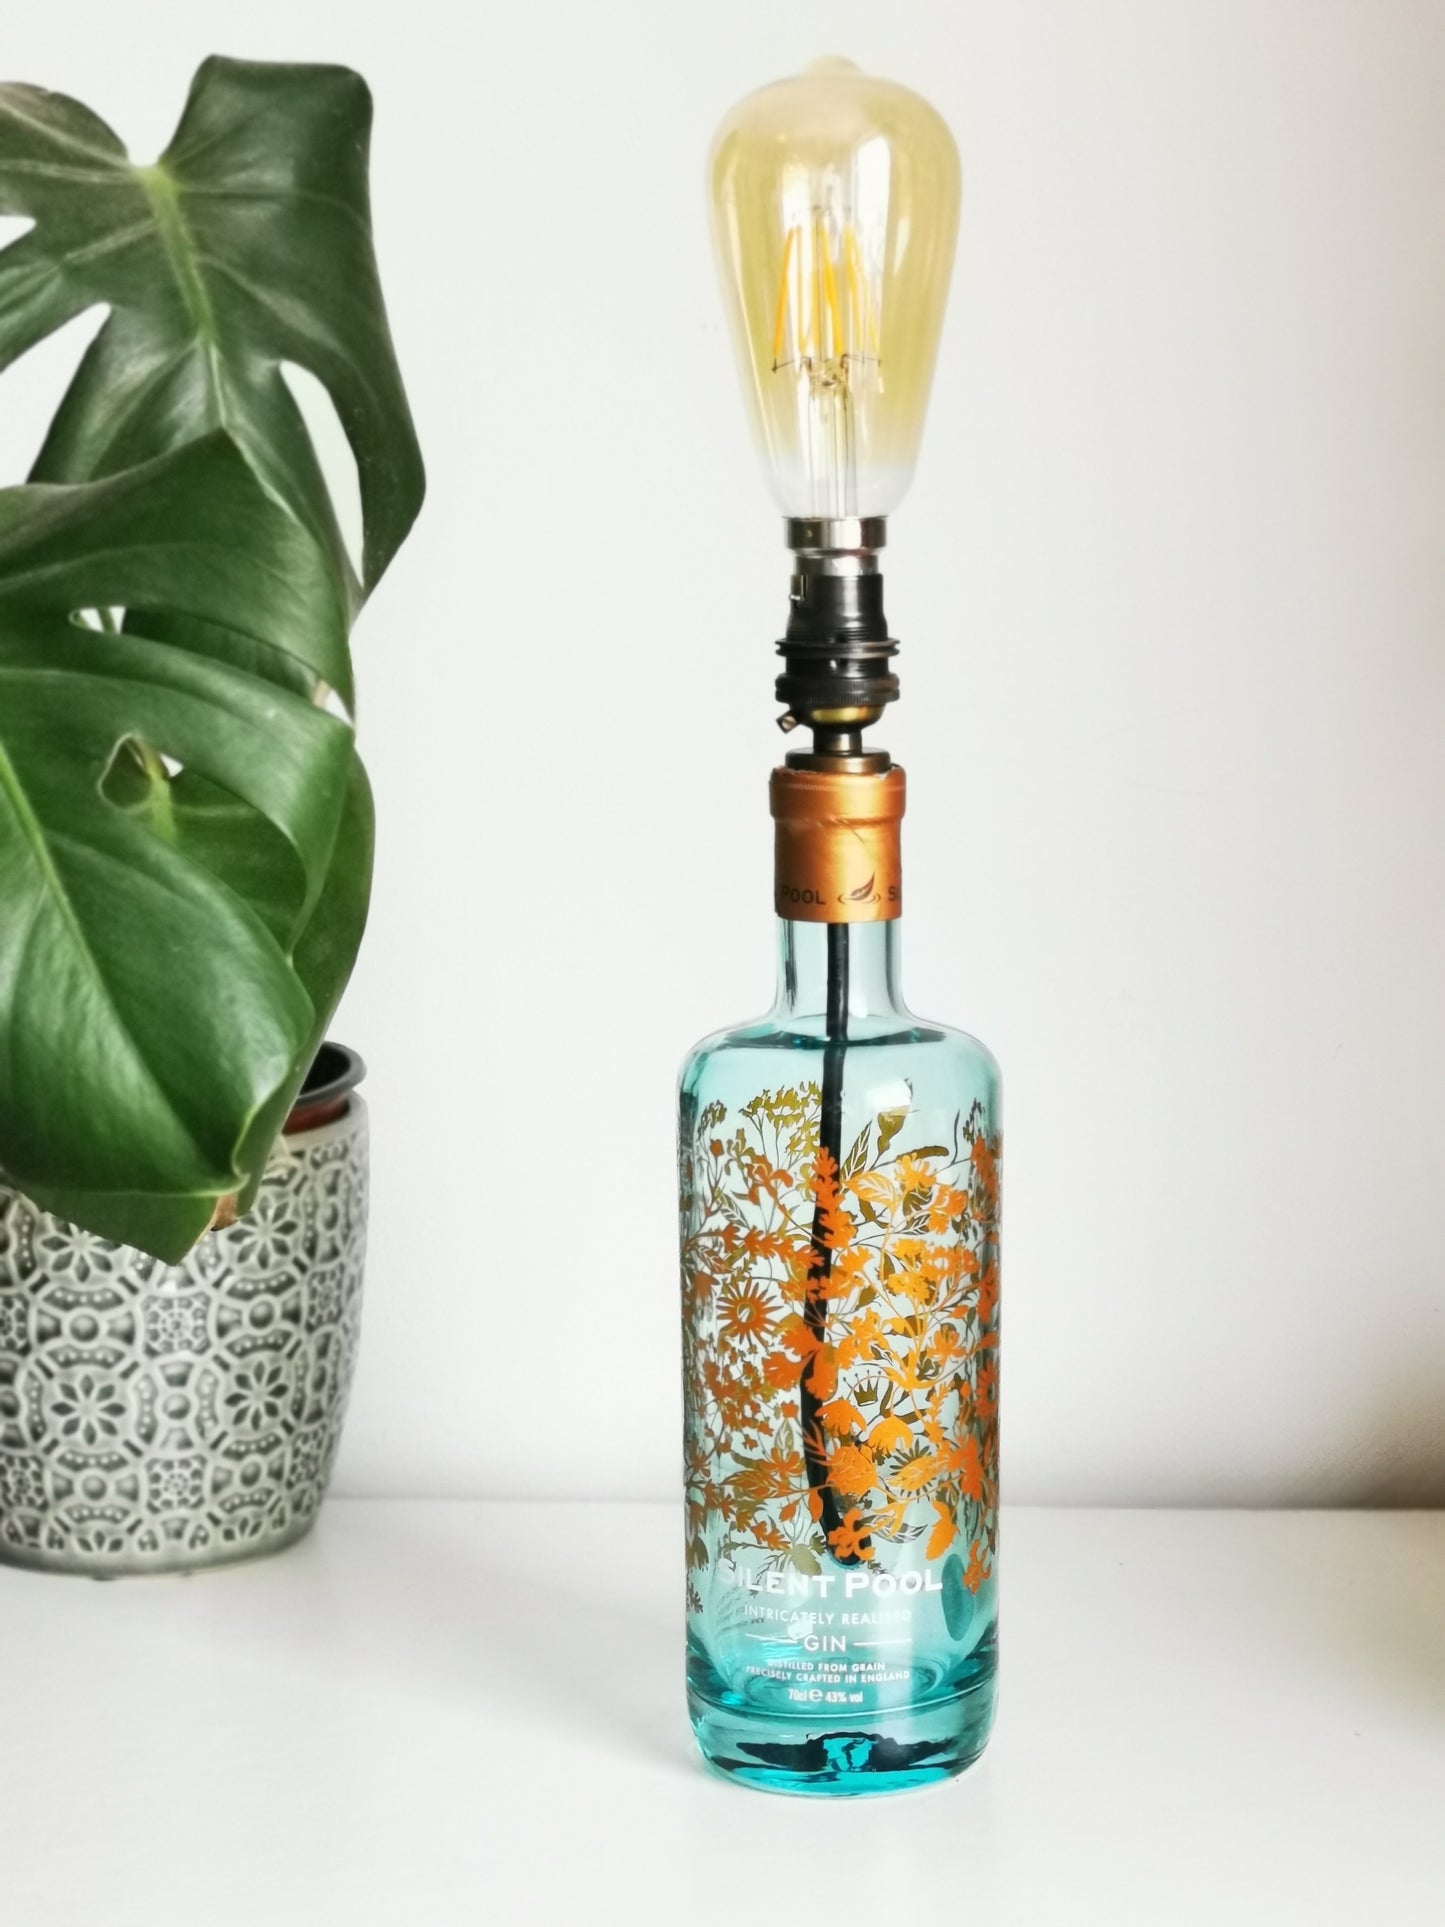 Silent Pool Gin Bottle Table Lamp Gin Bottle Table Lamps